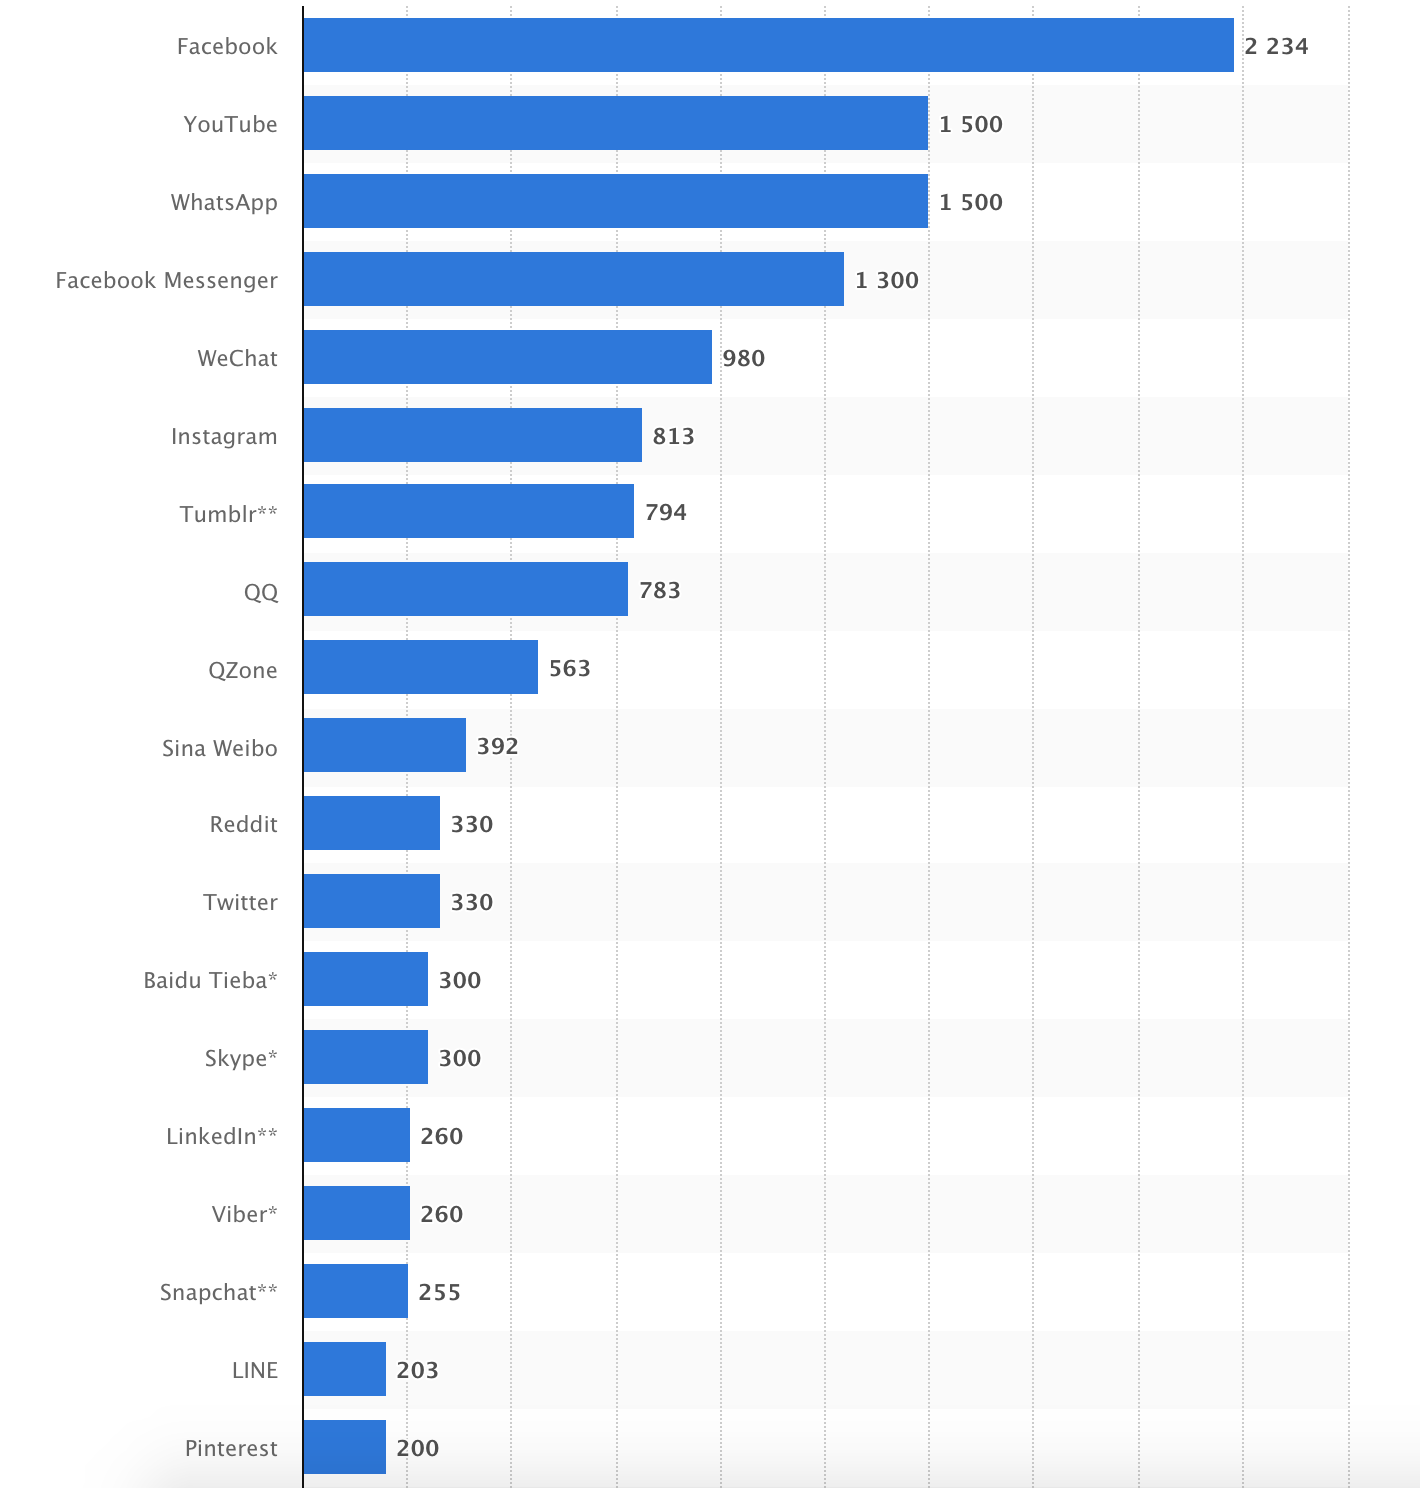 Most popular social networks worldwide as of April 2018, ranked by number of active users (in millions) - Statista